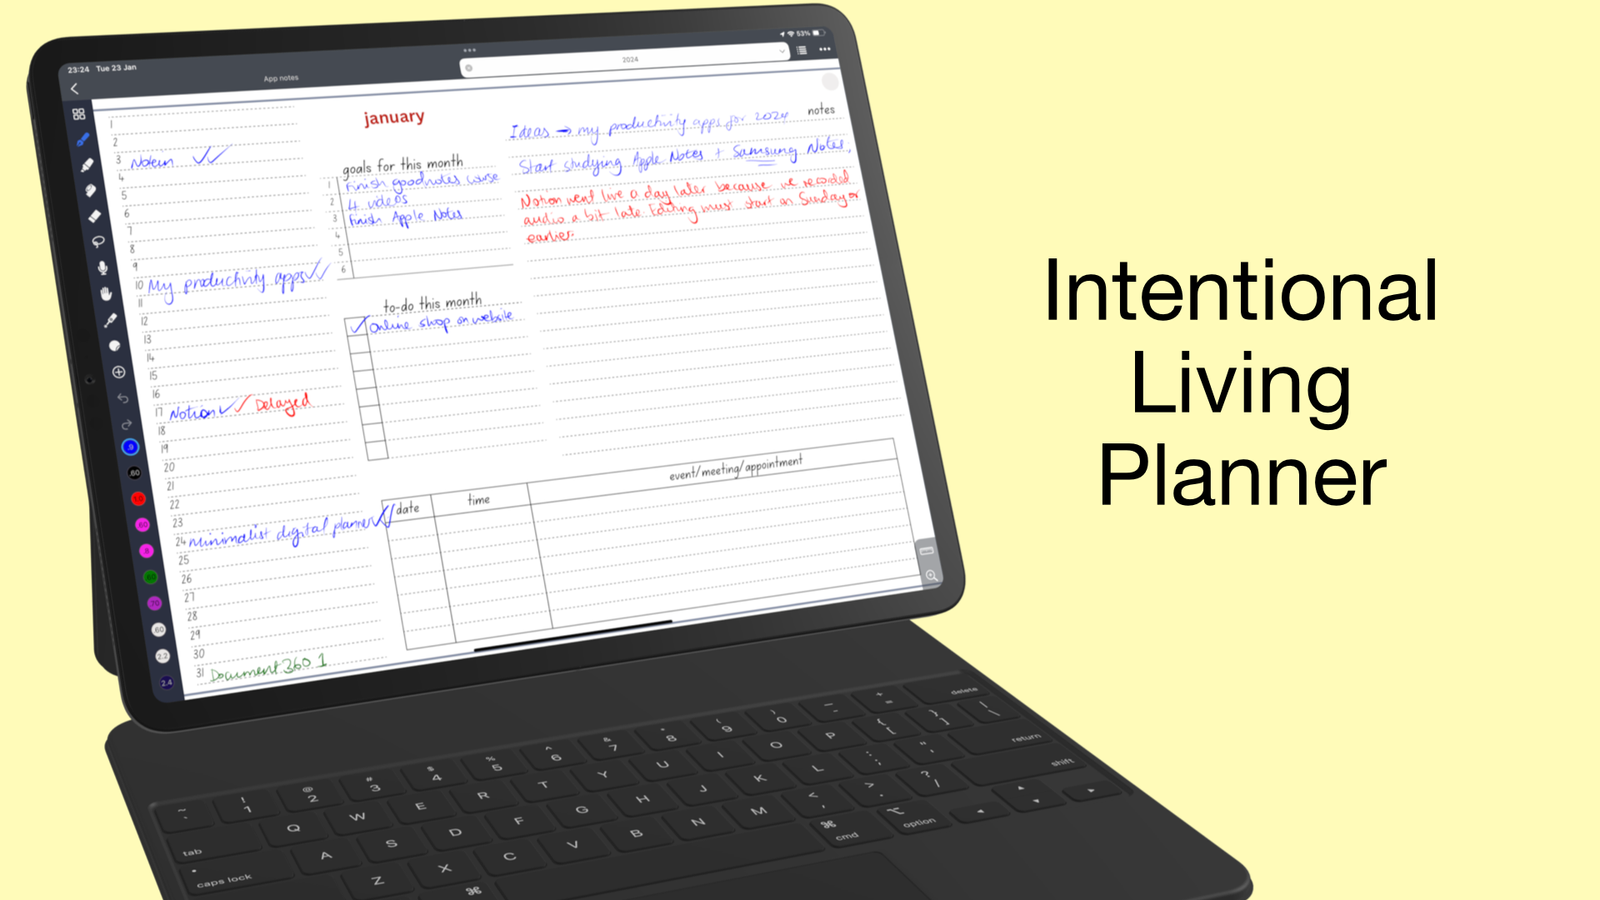 iPad with magic keyboard showing the Intentional Living Planner in Noteful.